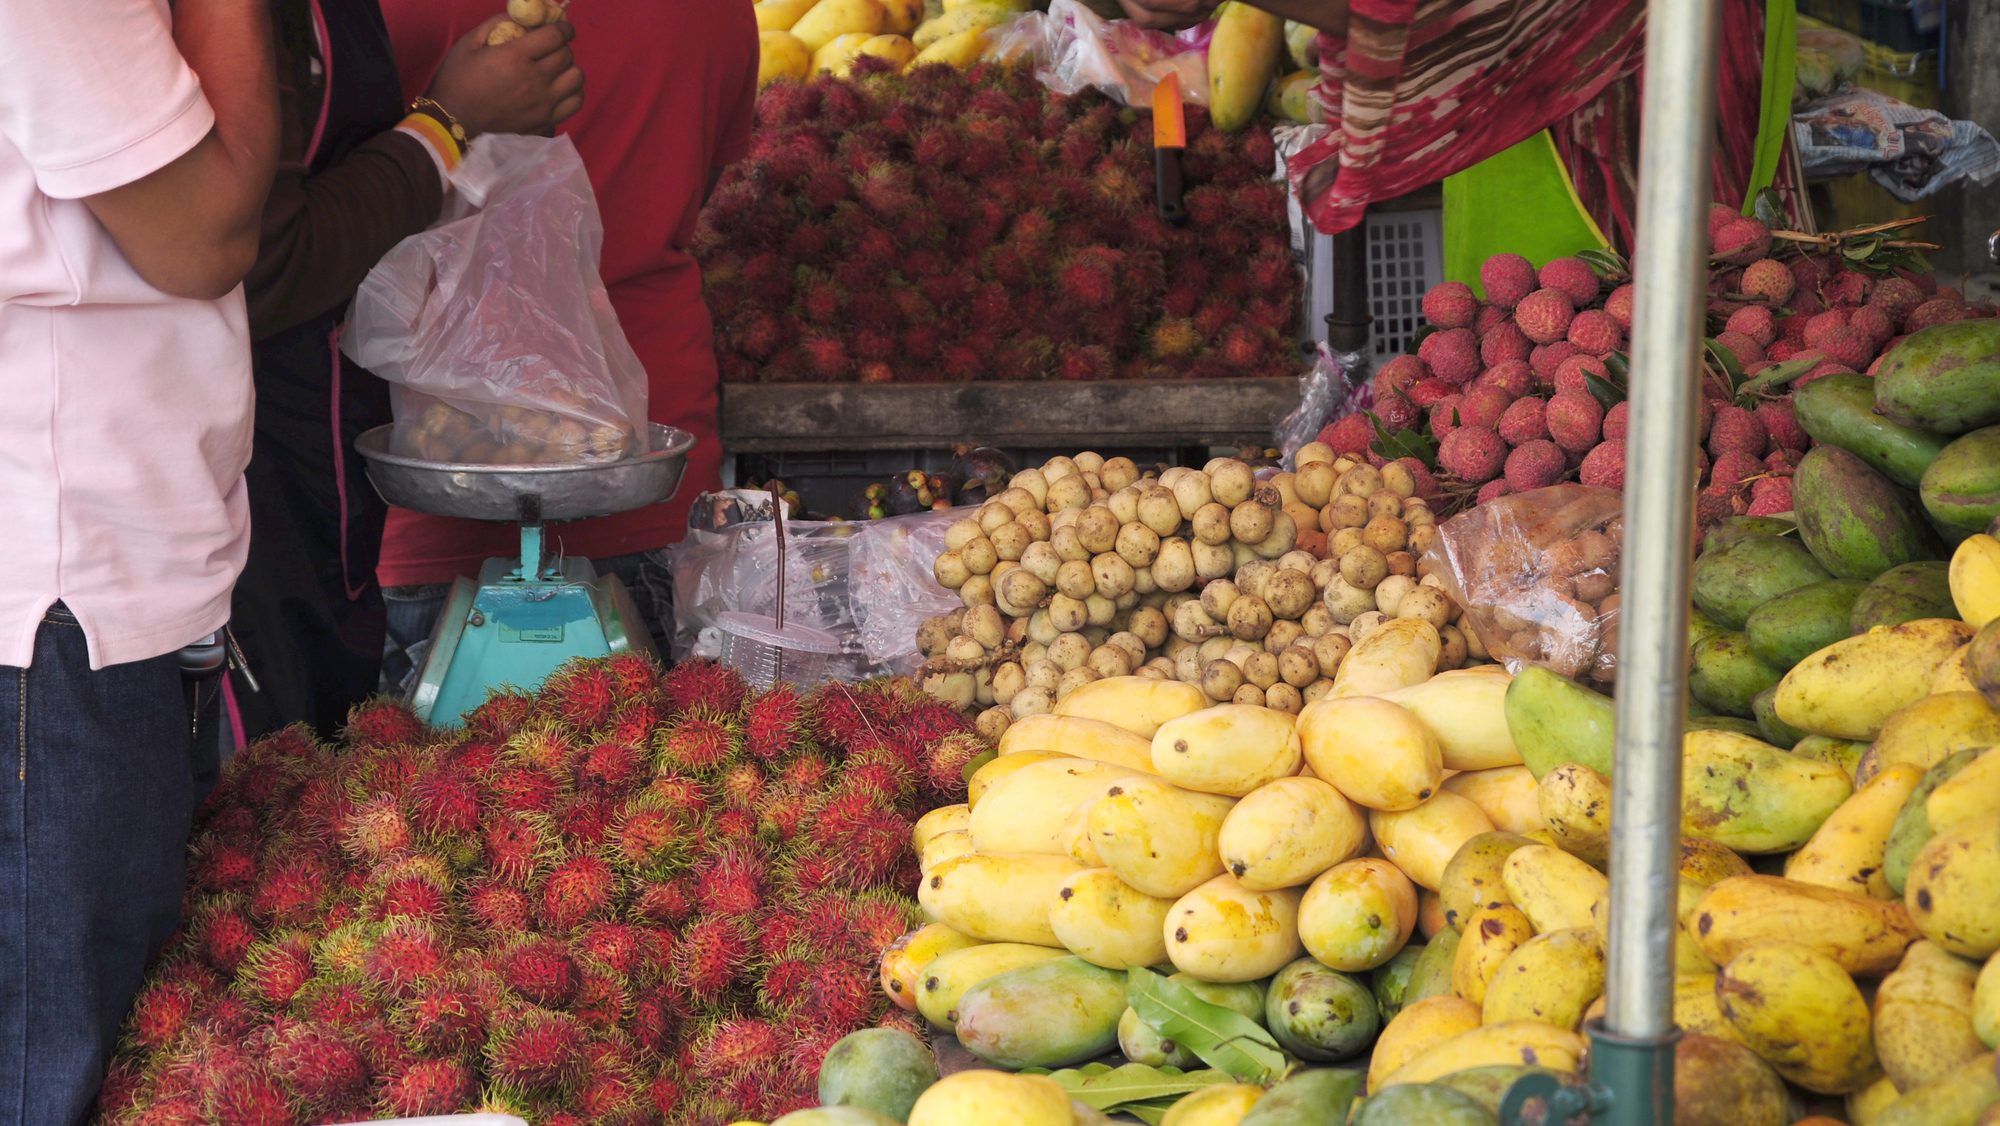 People buying fruits from a fruit vendor in the market.